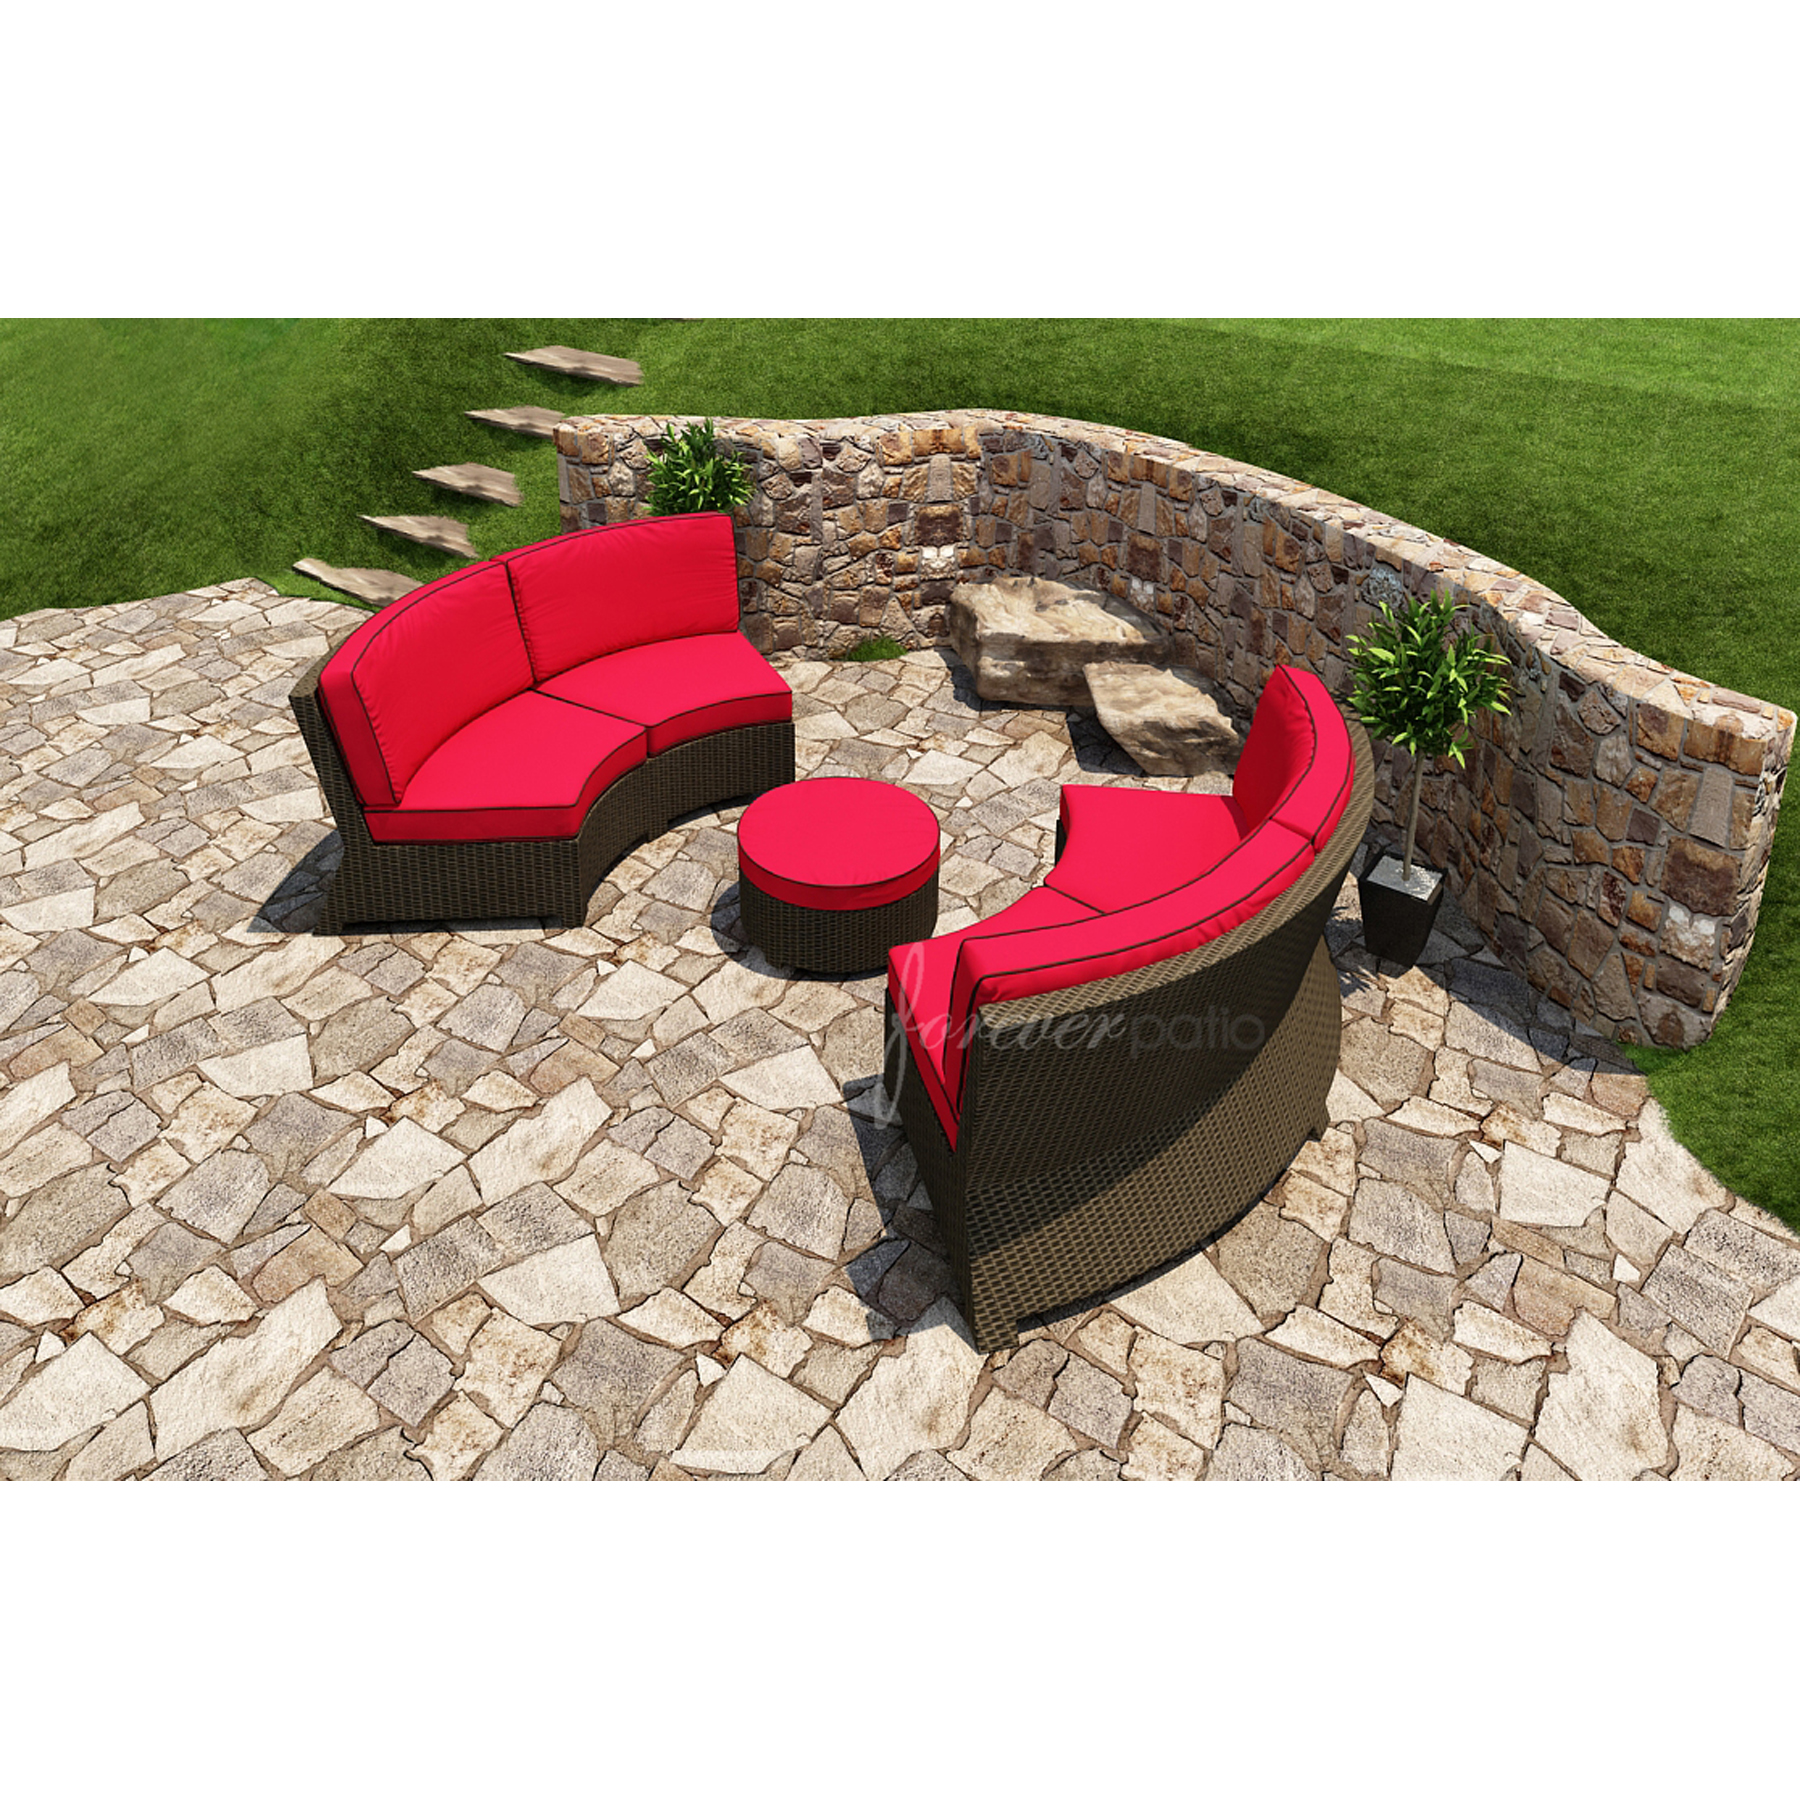 Barbados 3pc Patio Sectional Set featuring Sunbrella&reg; Fabric in Flagship Ruby